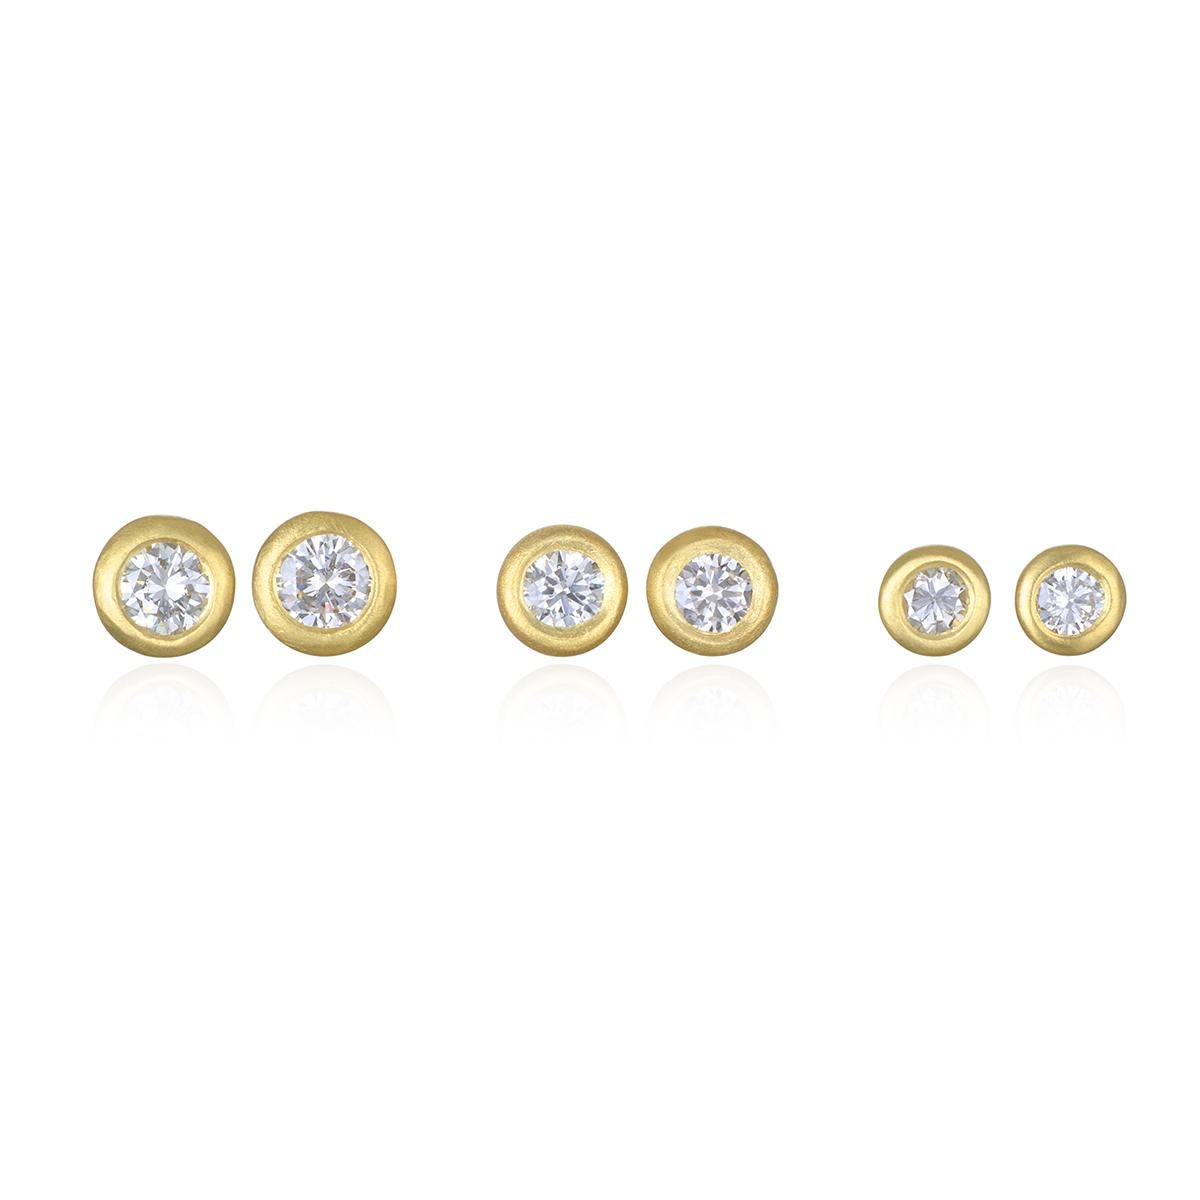 Faye Kim's 18 Karat Gold Diamond Martini Bezel Stud Earrings, with their clean, modern setting and matte finish, are the quintessential perfect pair of diamond stud earrings. With just enough sparkle to get noticed but with understated elegance,